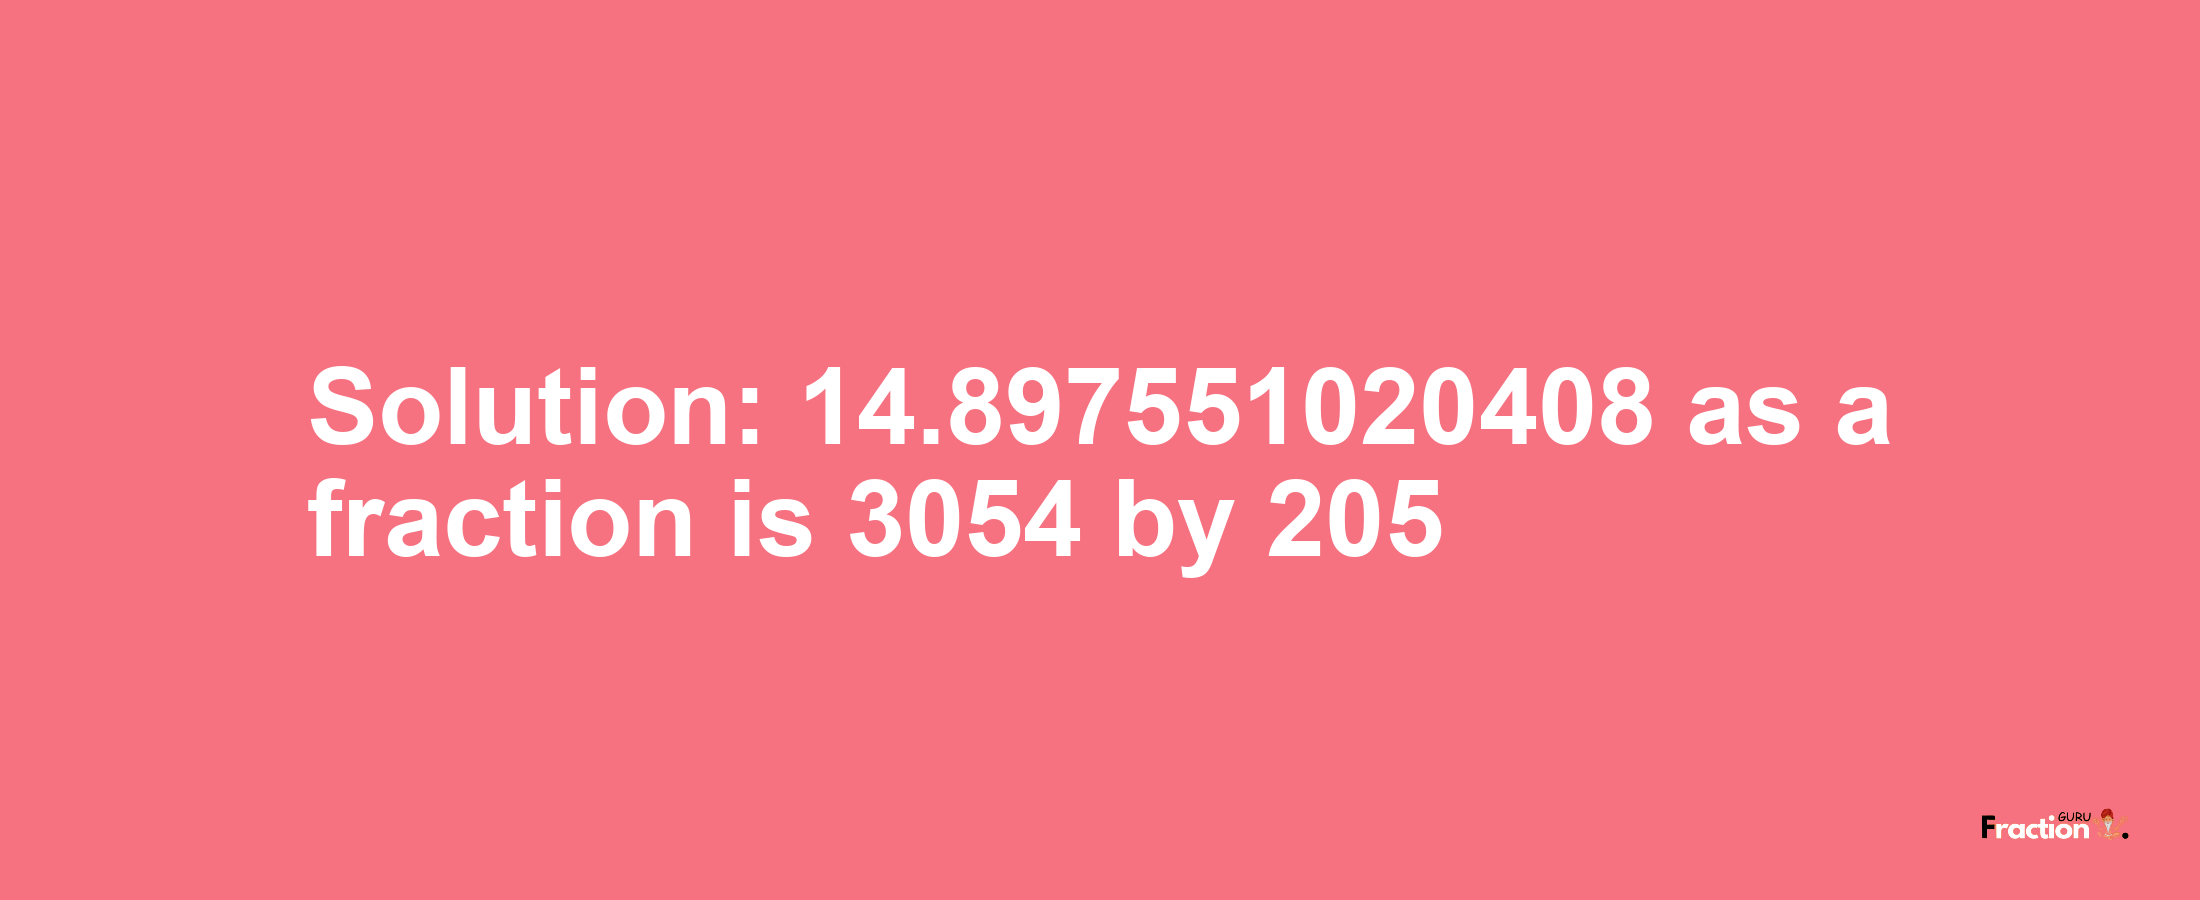 Solution:14.897551020408 as a fraction is 3054/205